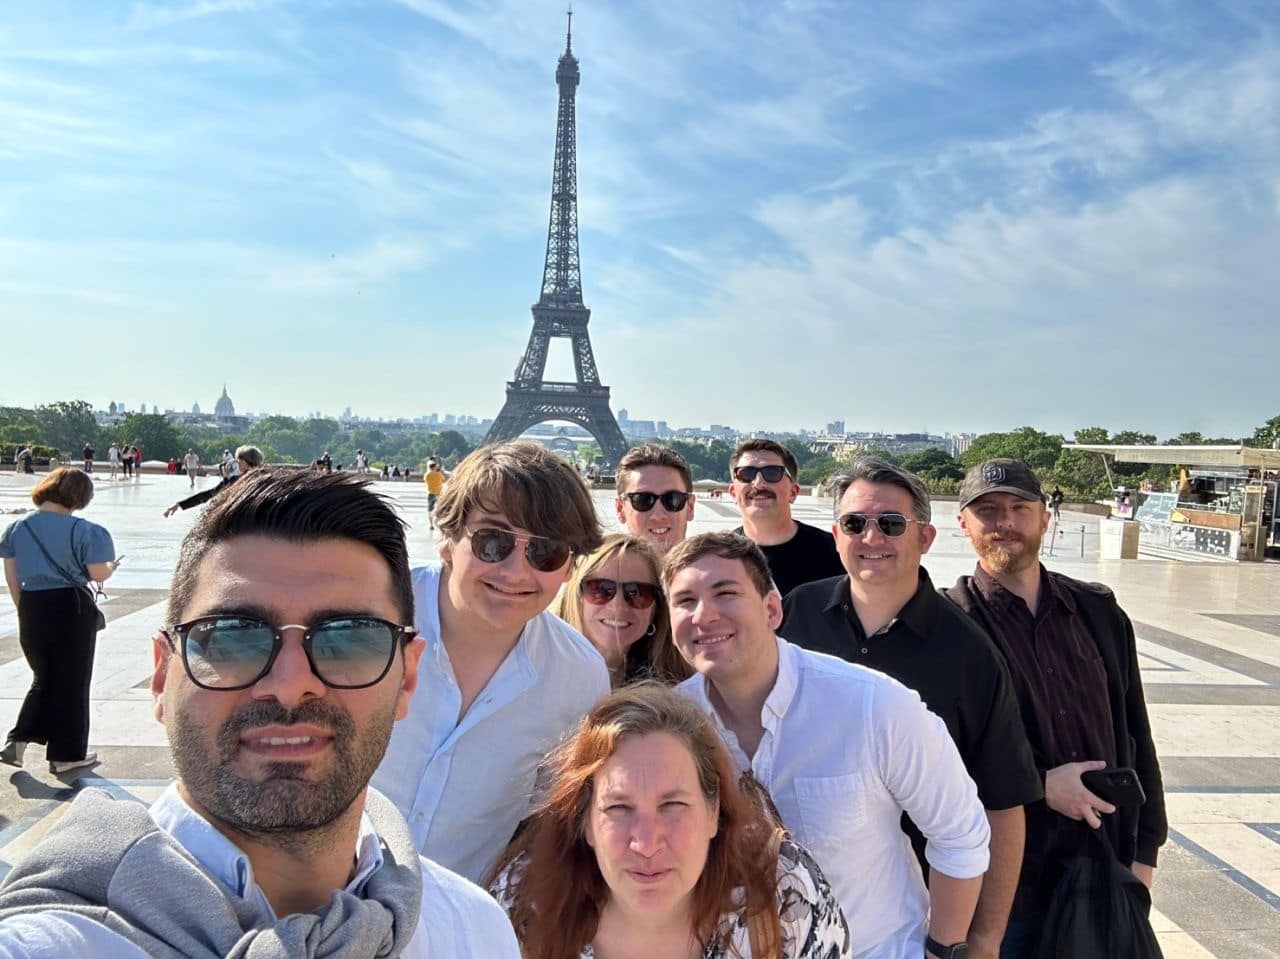 Angelia Keever and her peers from Embry-Riddle Worldwide visiting Paris while studying abroad in Europe.